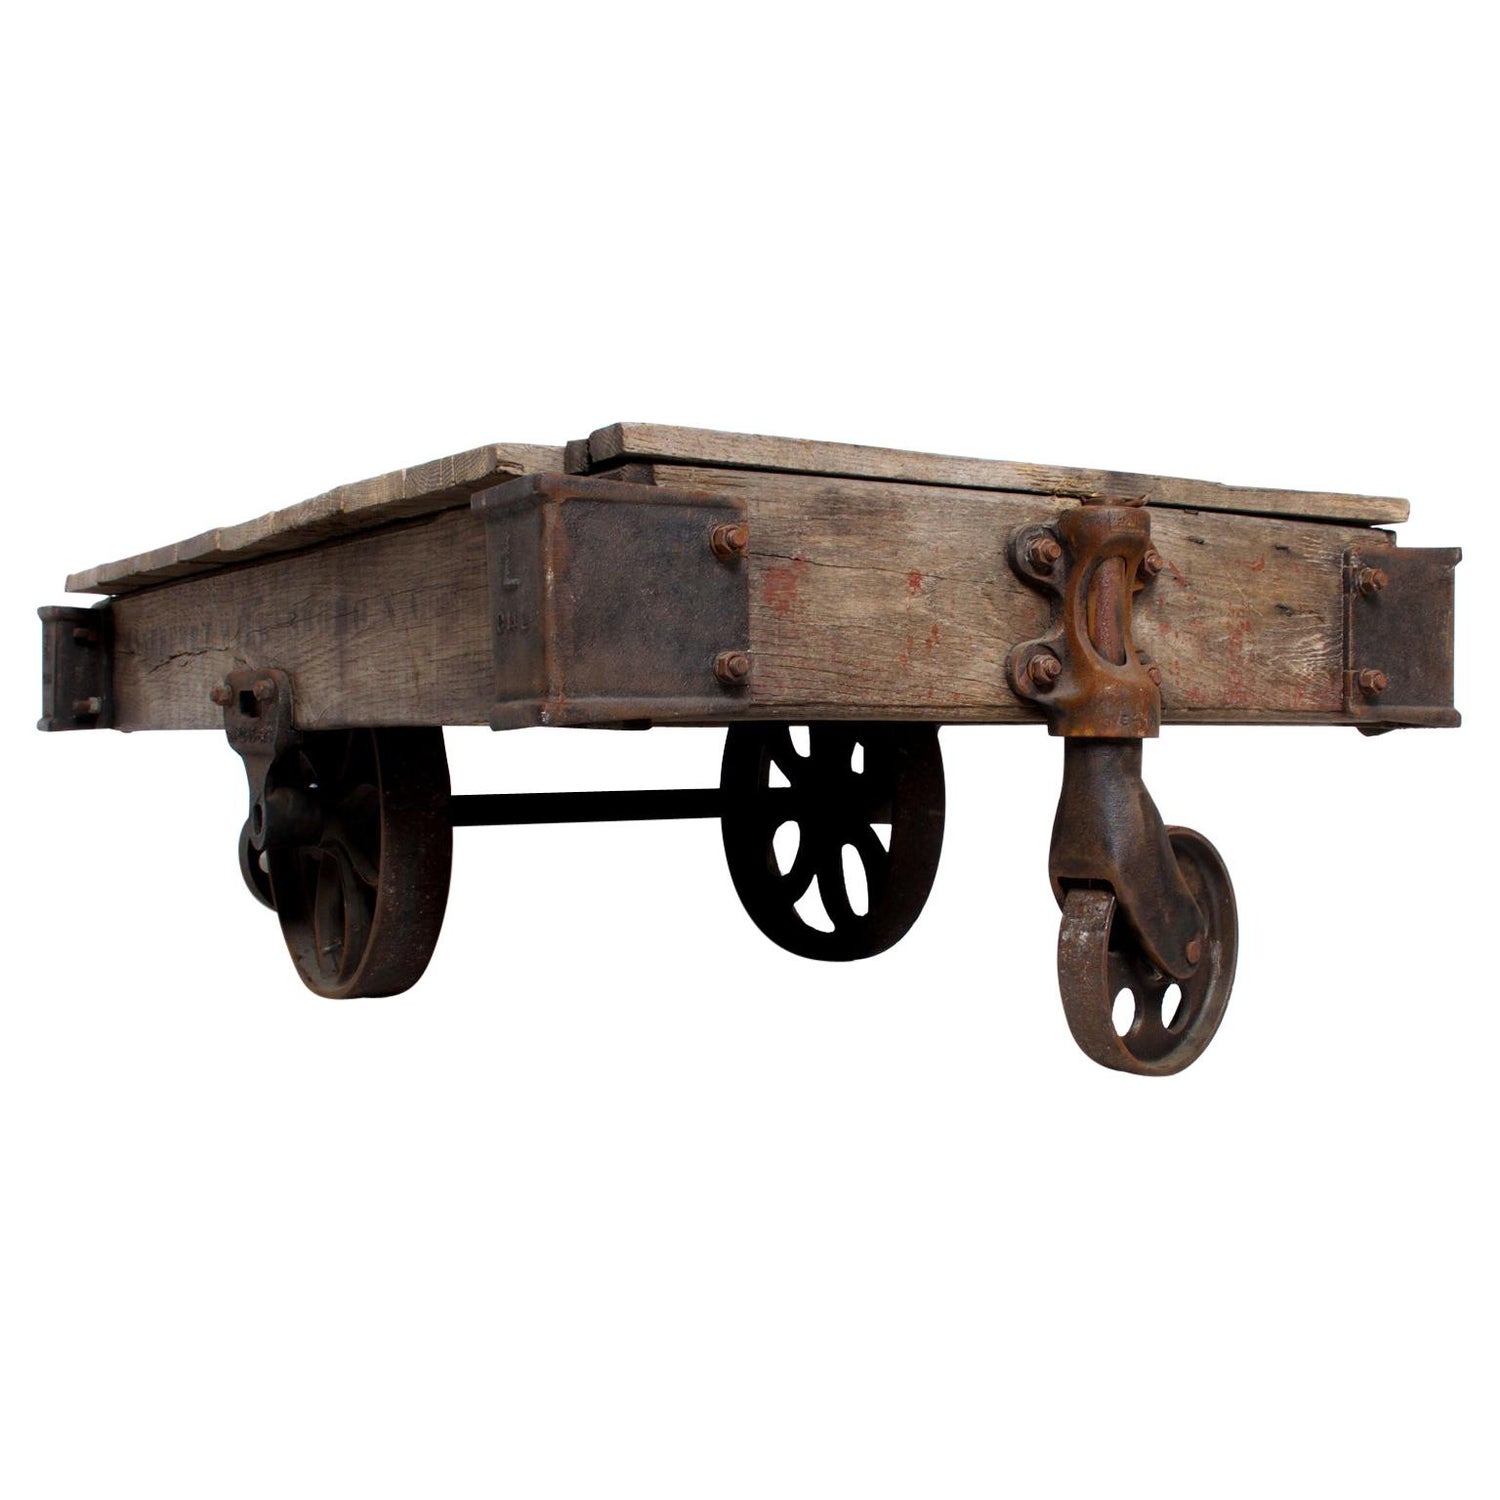 Antique Vintage Luggage Cart Coffee Table Circa 1920 With Cast Iron Wheels At 1stdibs